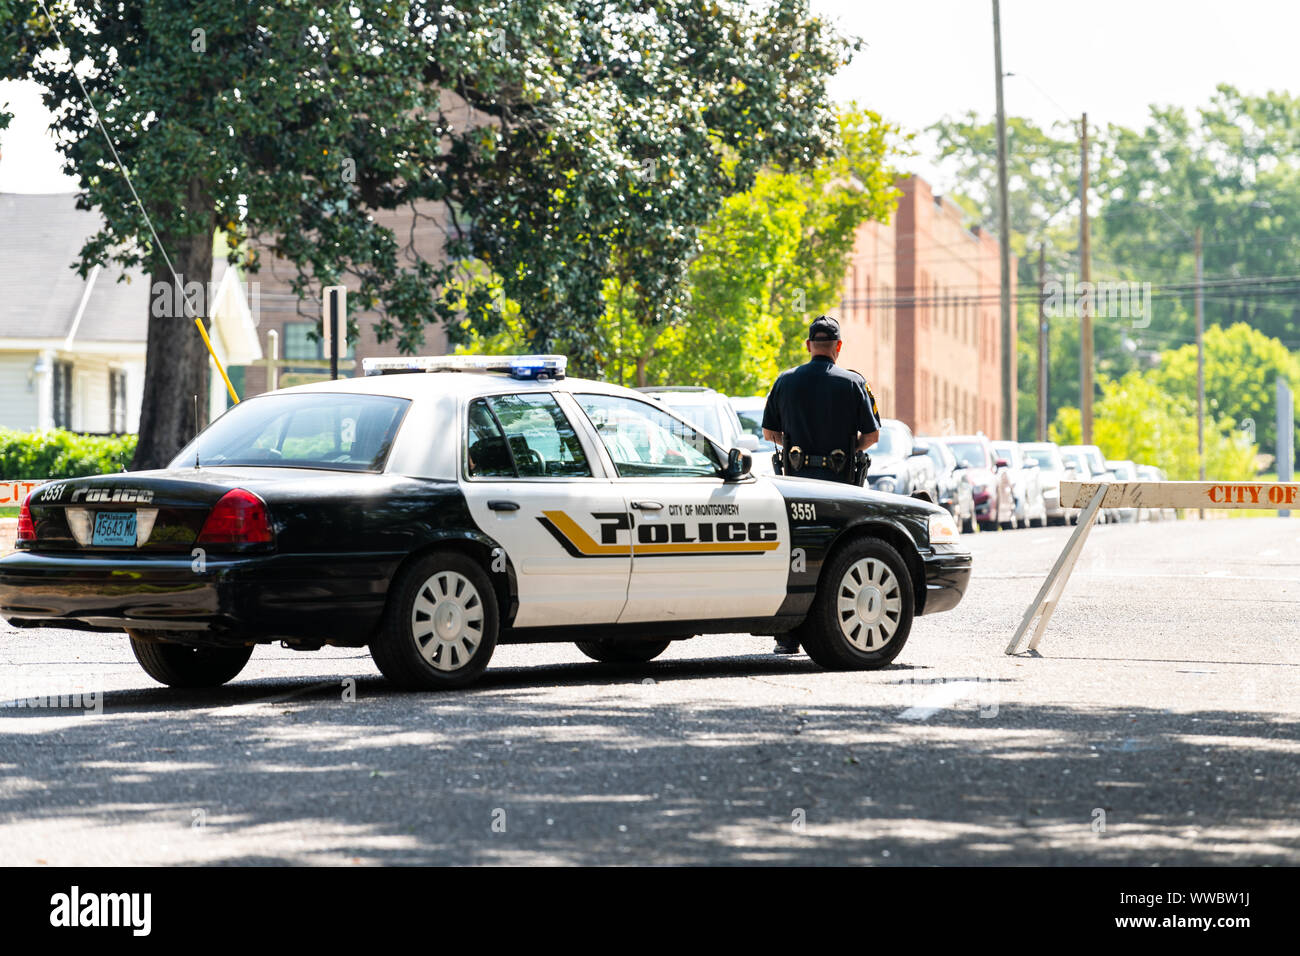 Montgomery, USA - April 21, 2018: Alabama city police officer car on street, with sign, people walking on sidewalk, blocked road block or roadblock Stock Photo